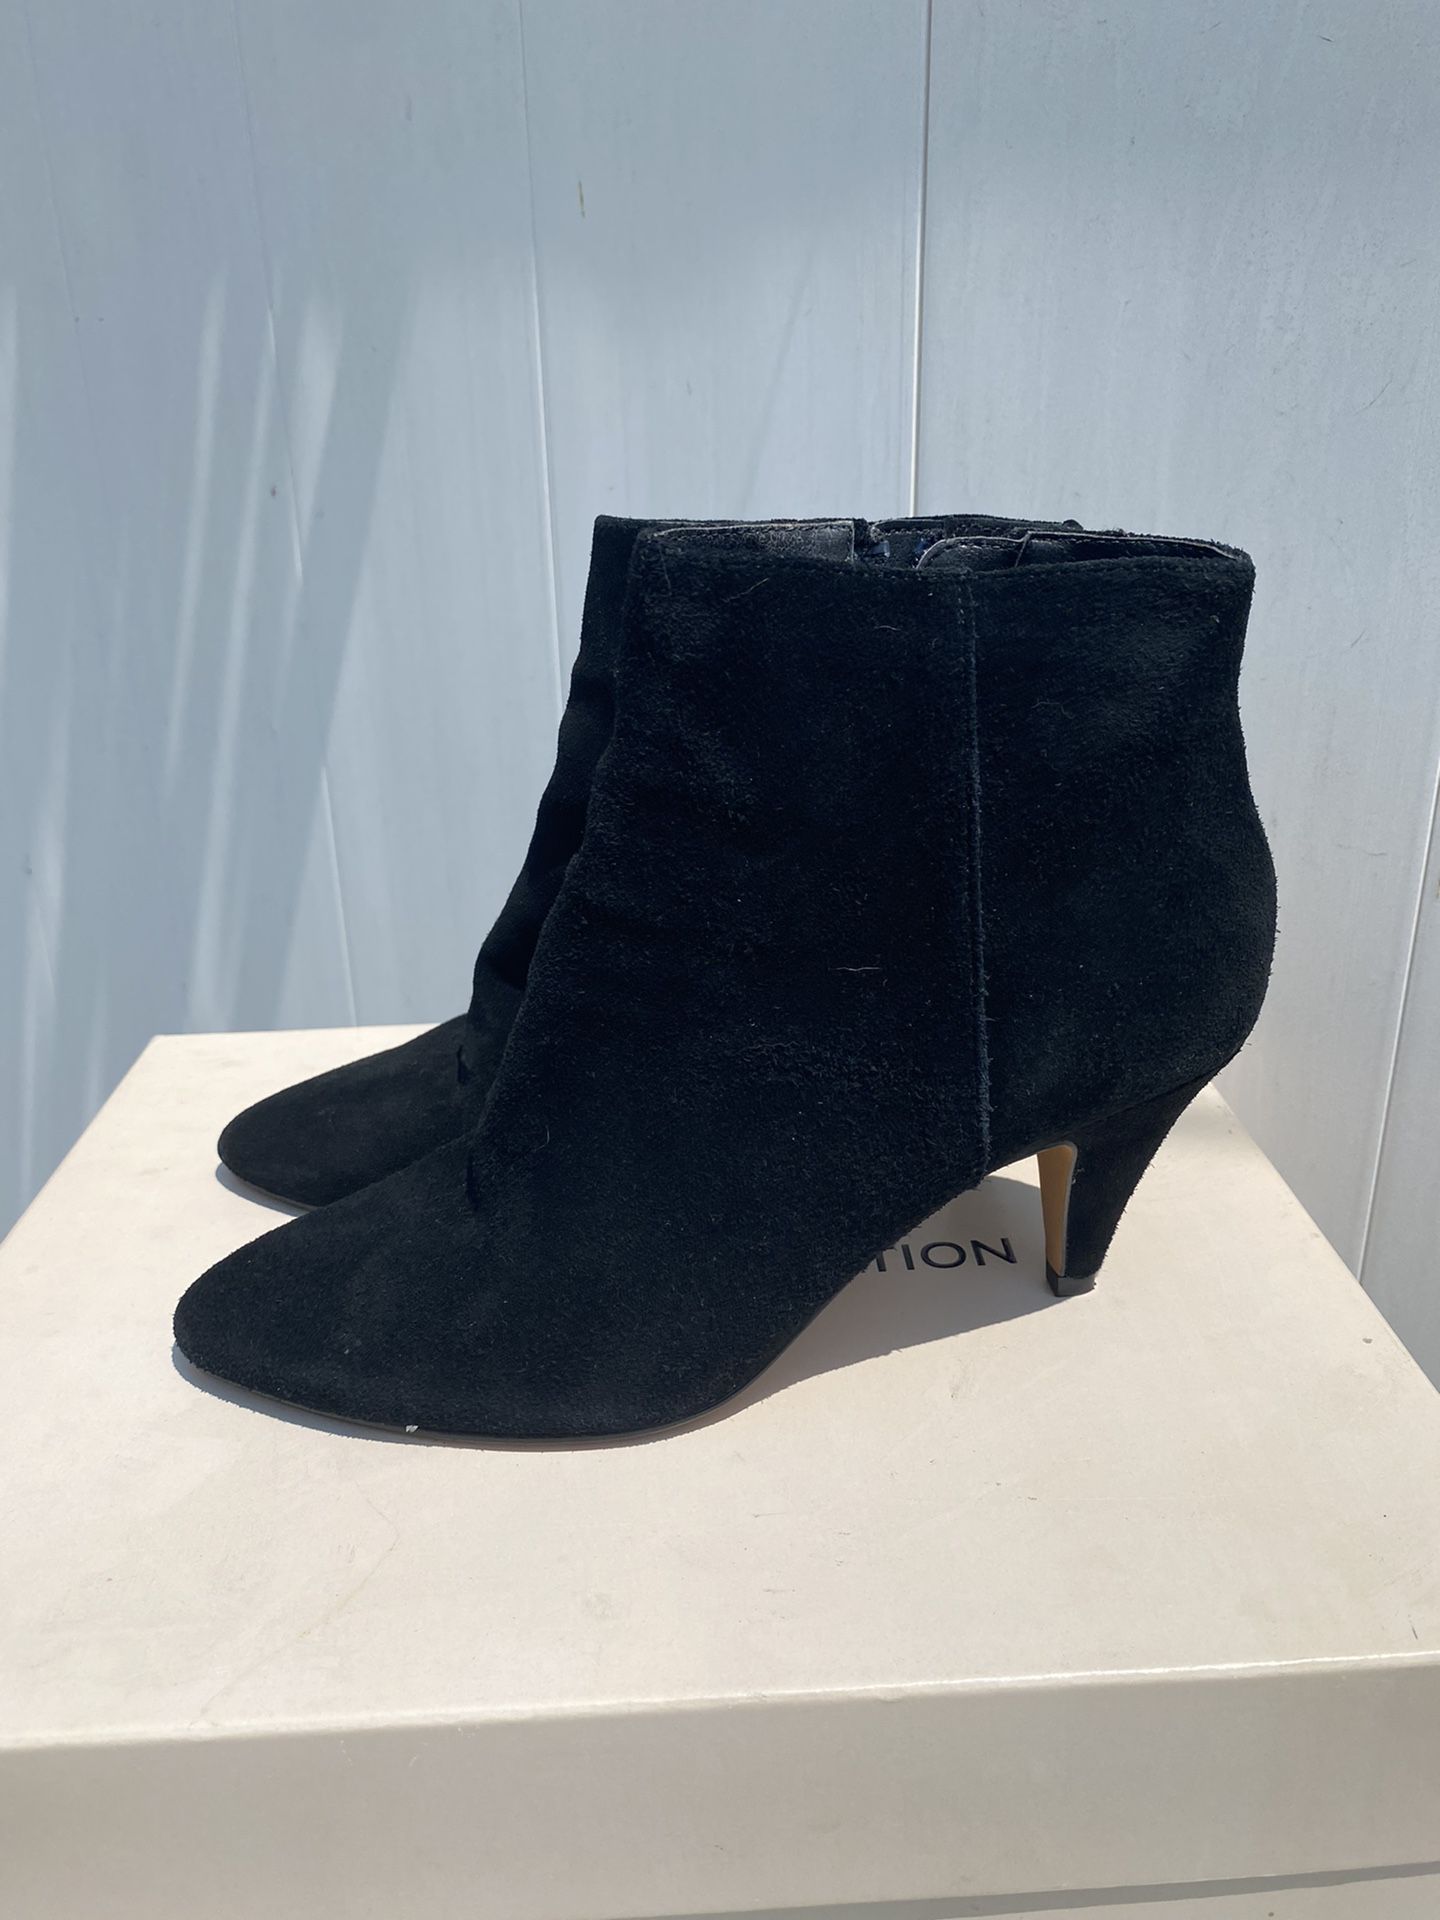 Pre owned Dolce vita Ankle Bootie